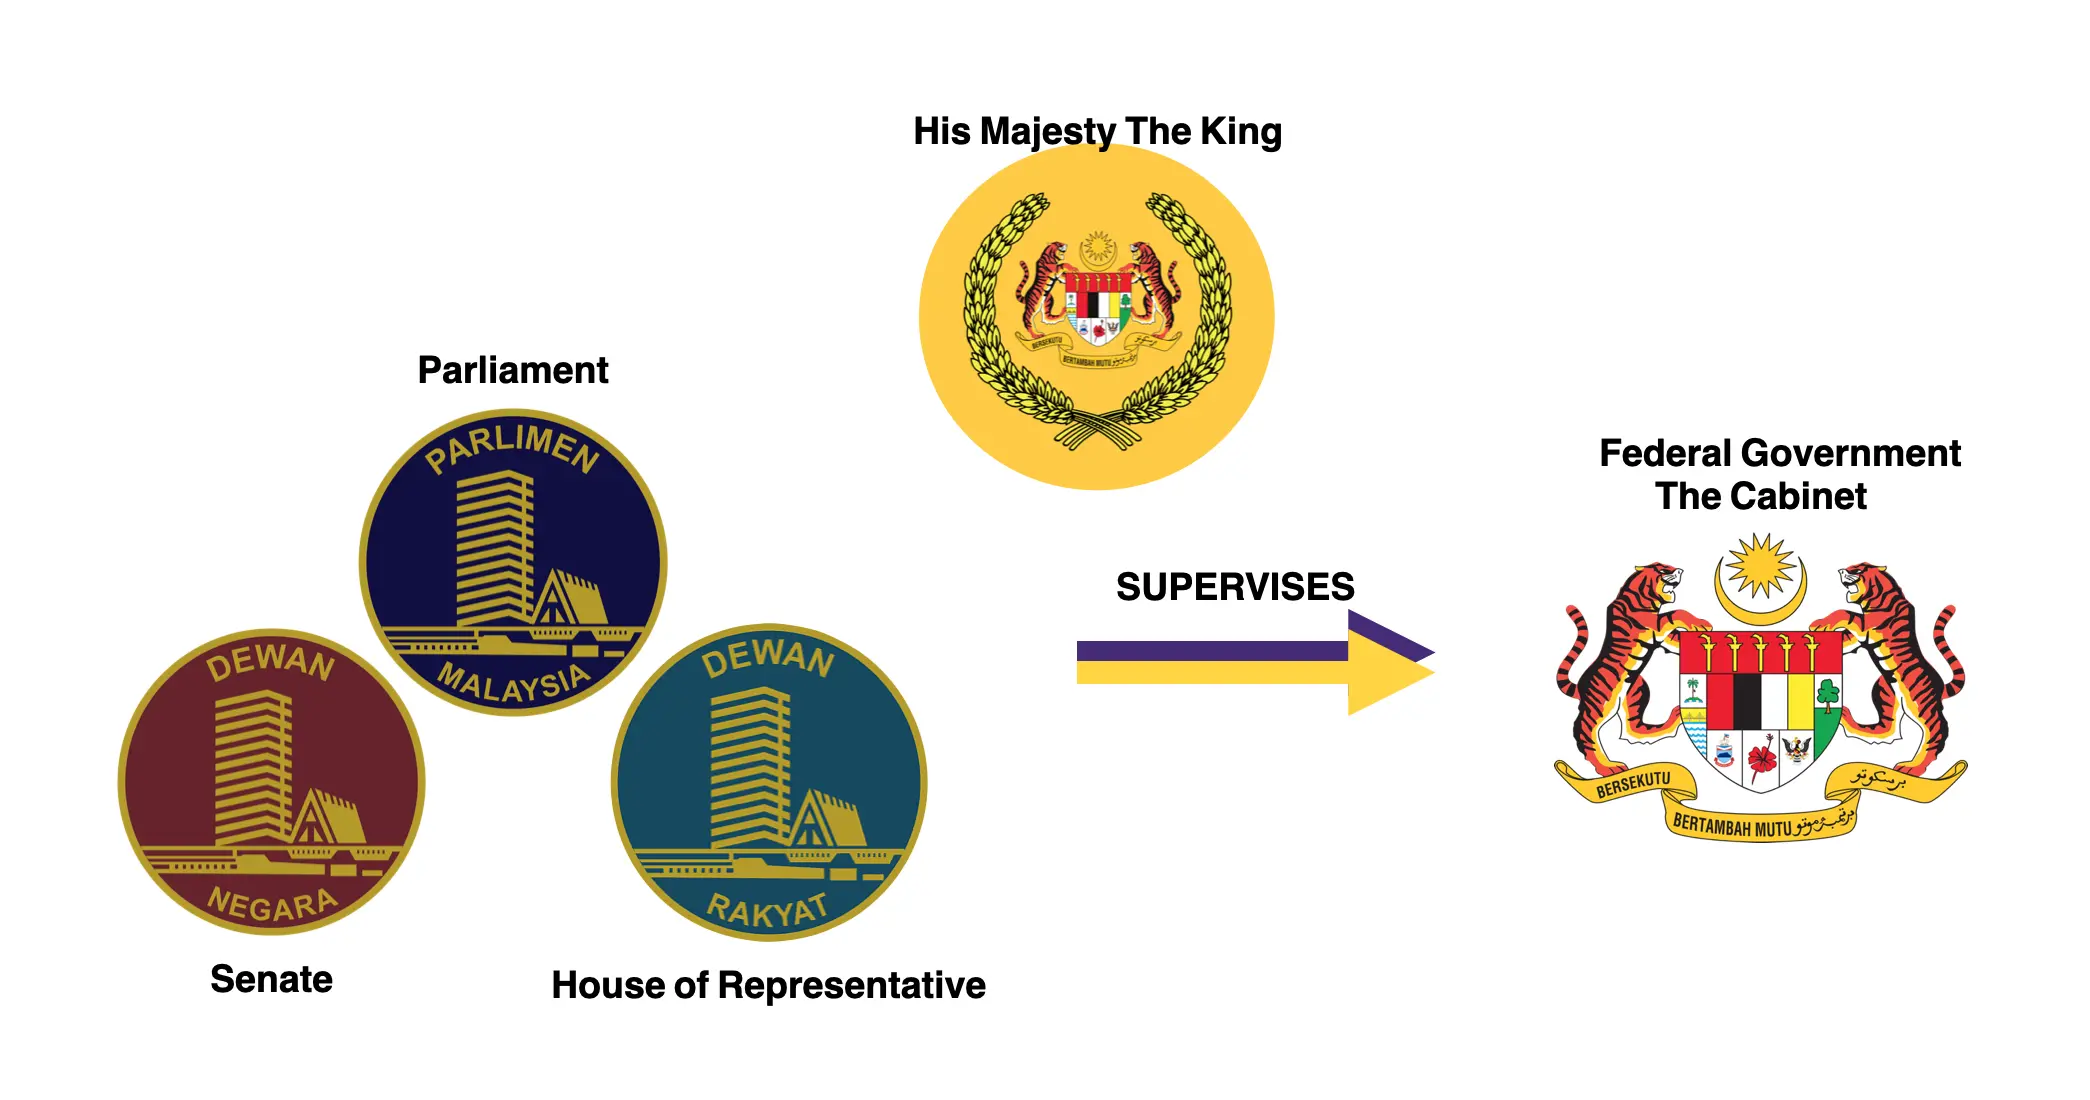 Parliament's relation in the state's leadership structure